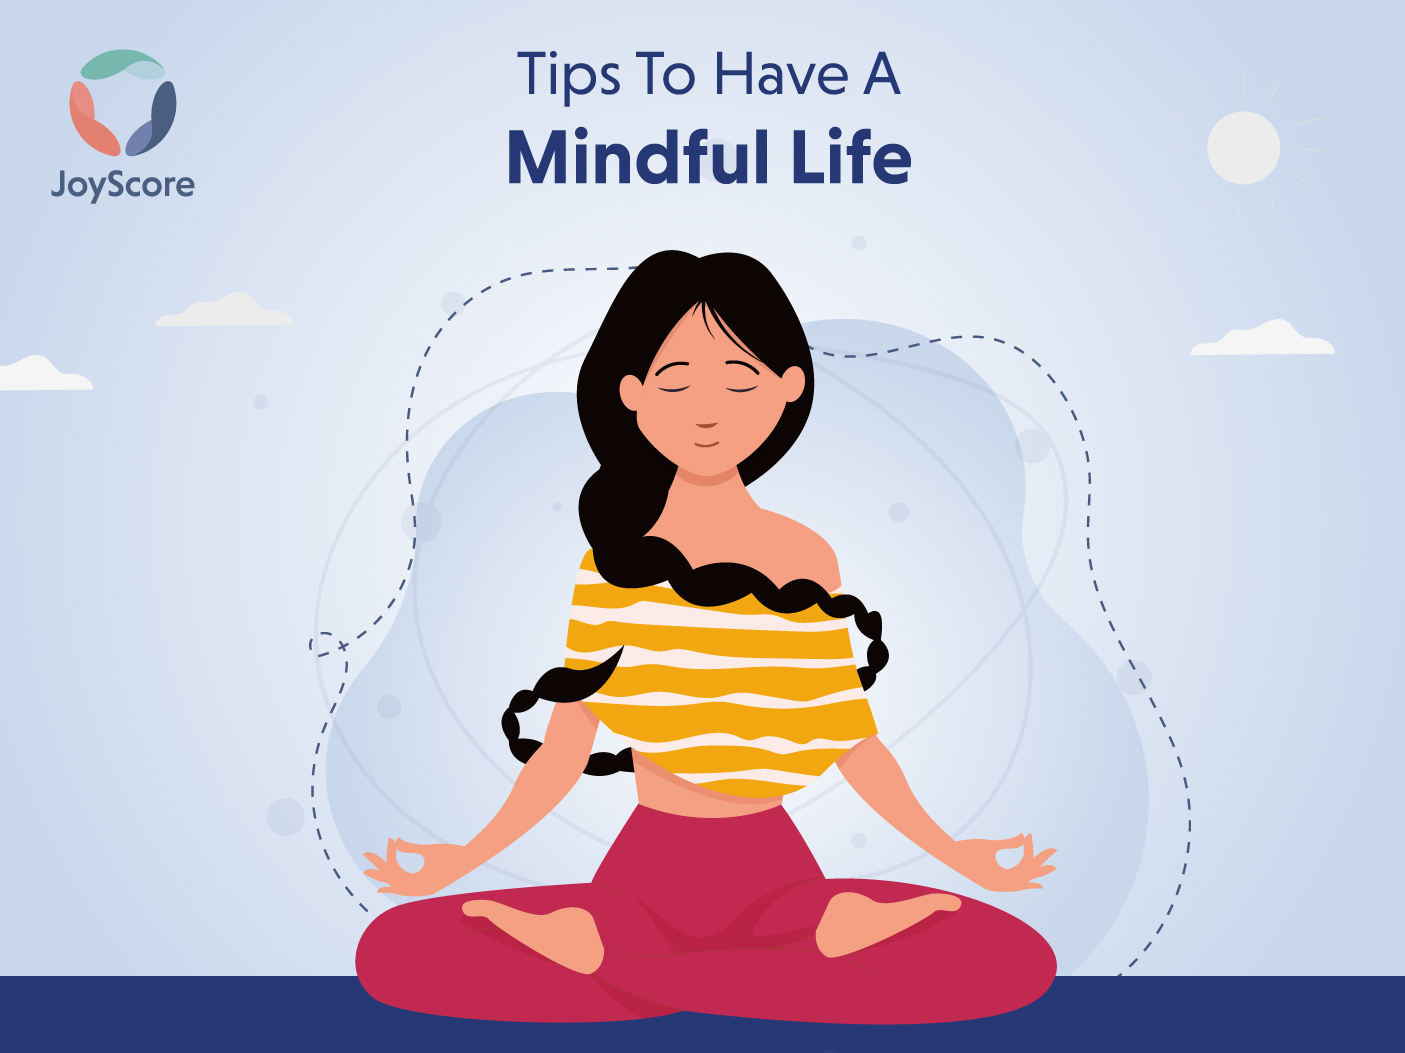 6 Simple Tips To Have A Mindful Life